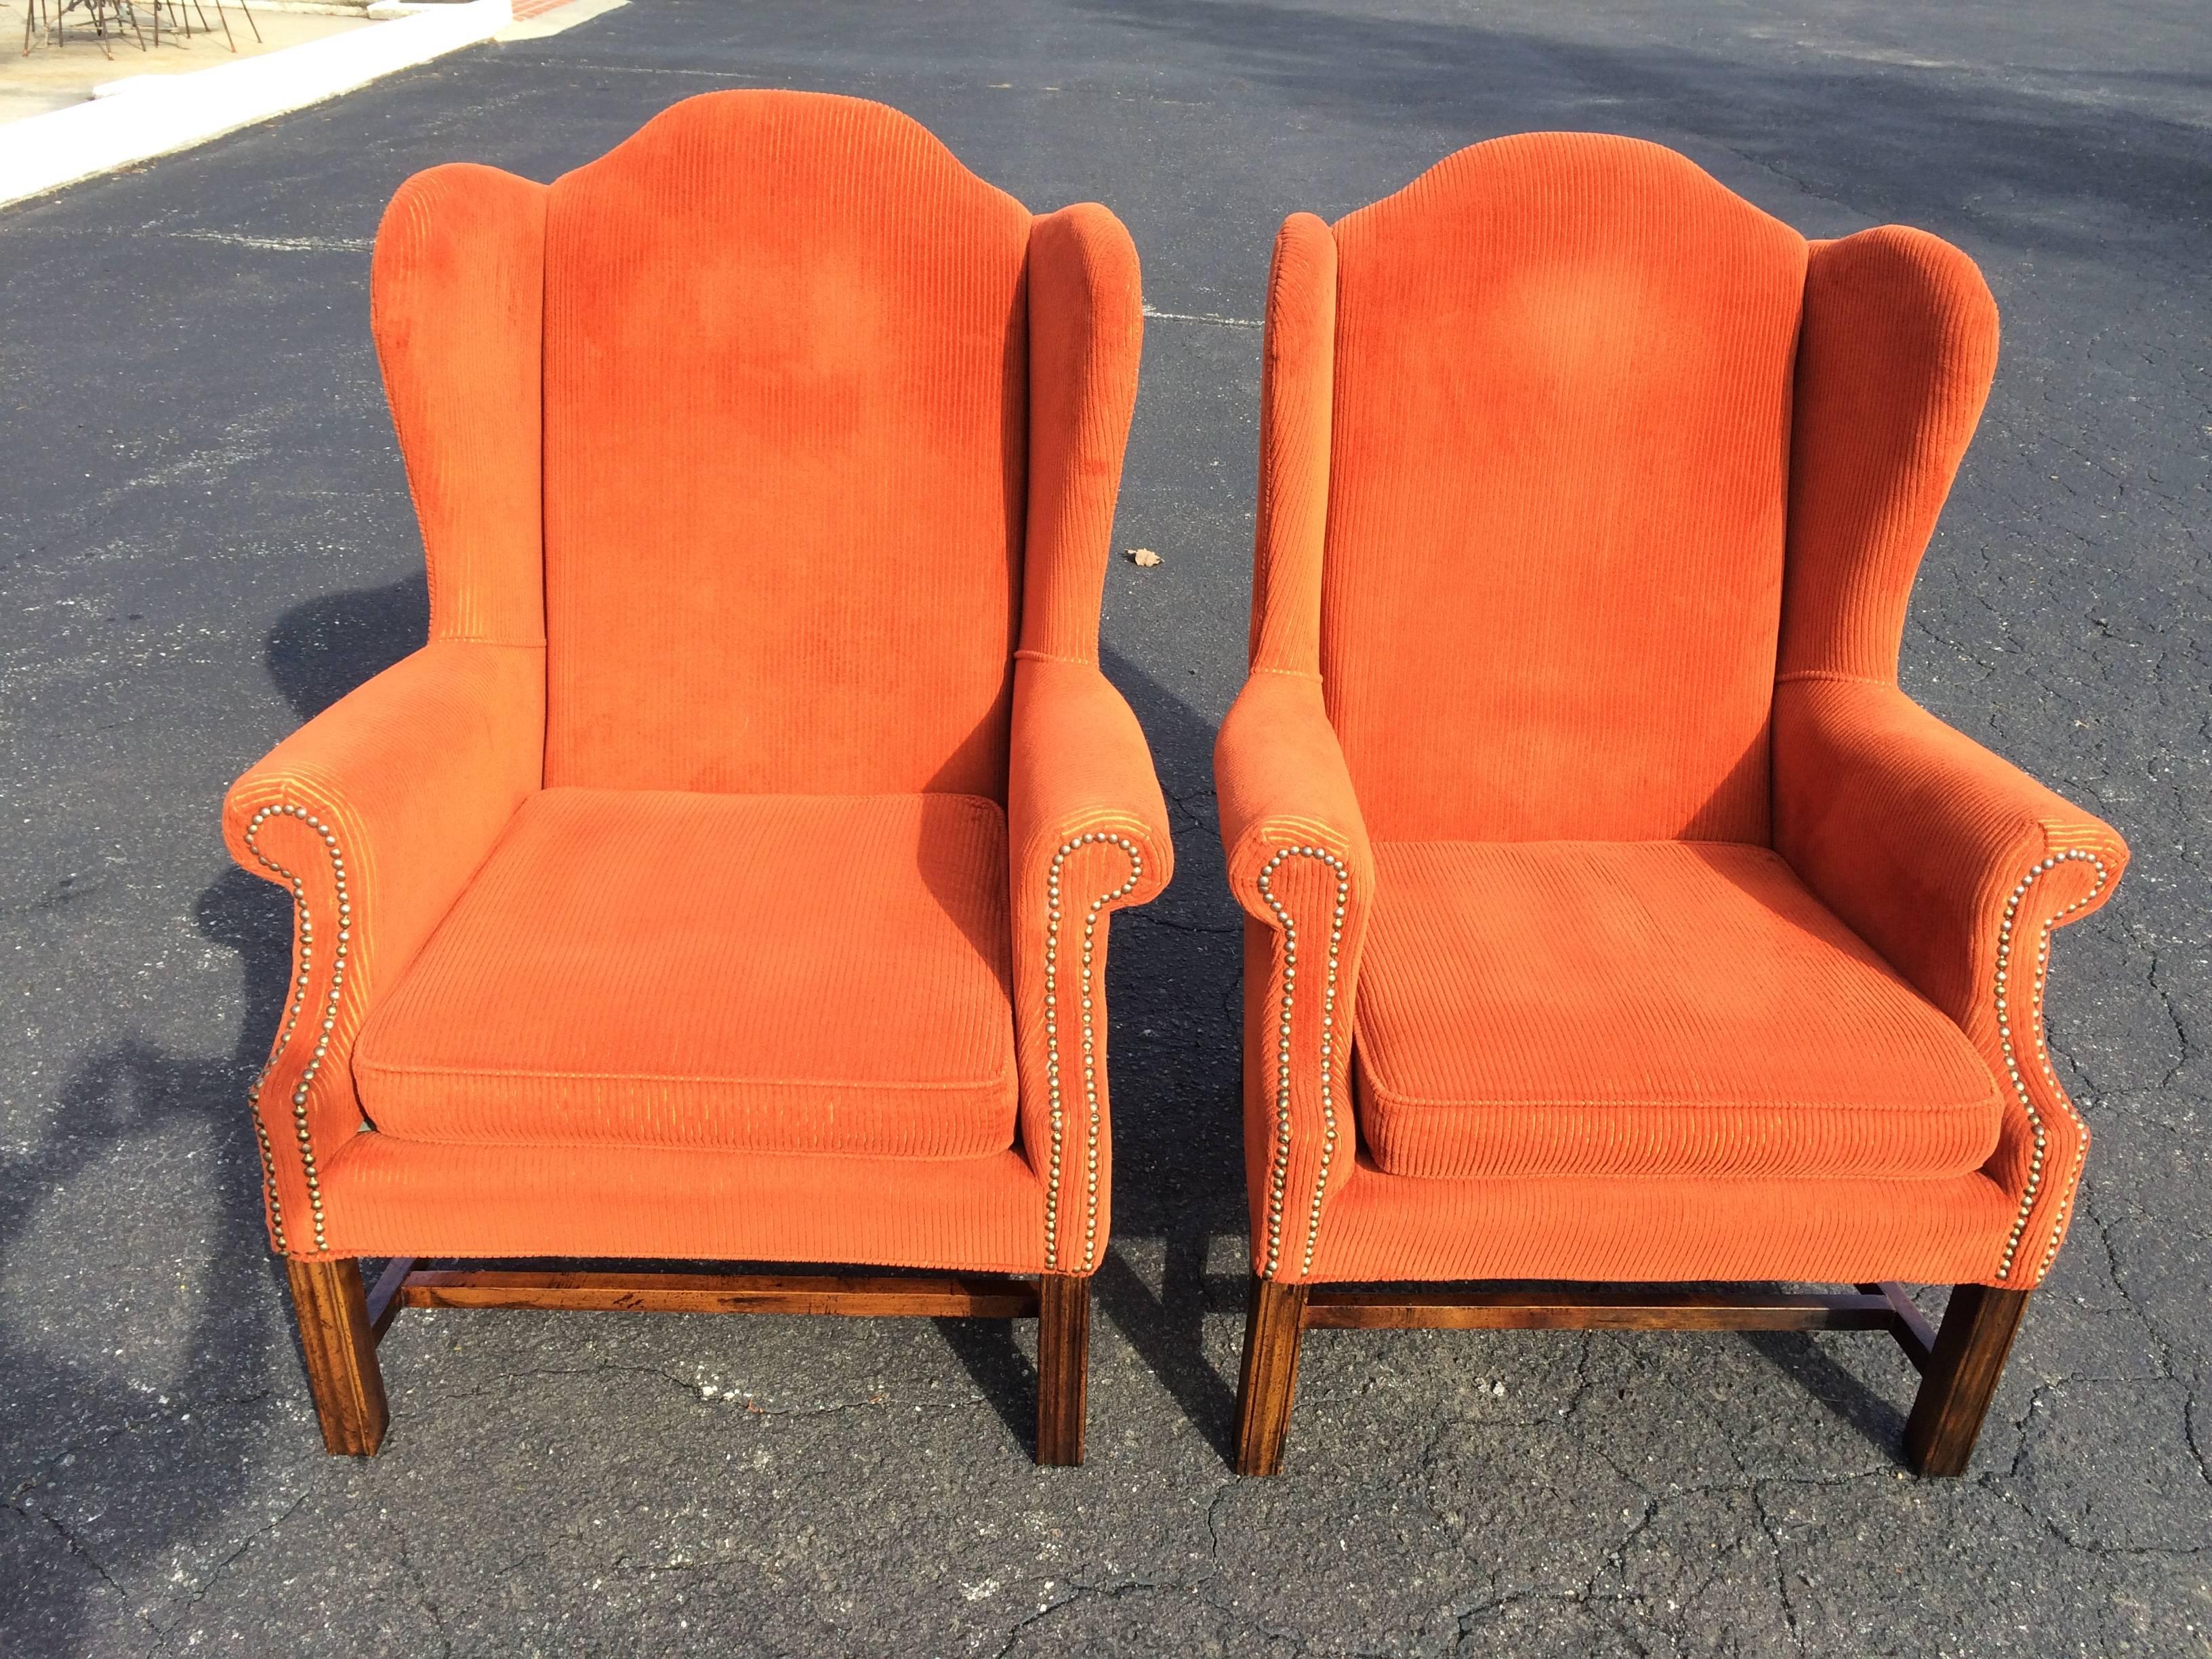 Pair of orange corduroy wing back chairs. Traditional in style but fun in color. This pair of chairs has brass nail head trim and sturdy wooden base. Put these in front of your fireplace and relax.
 